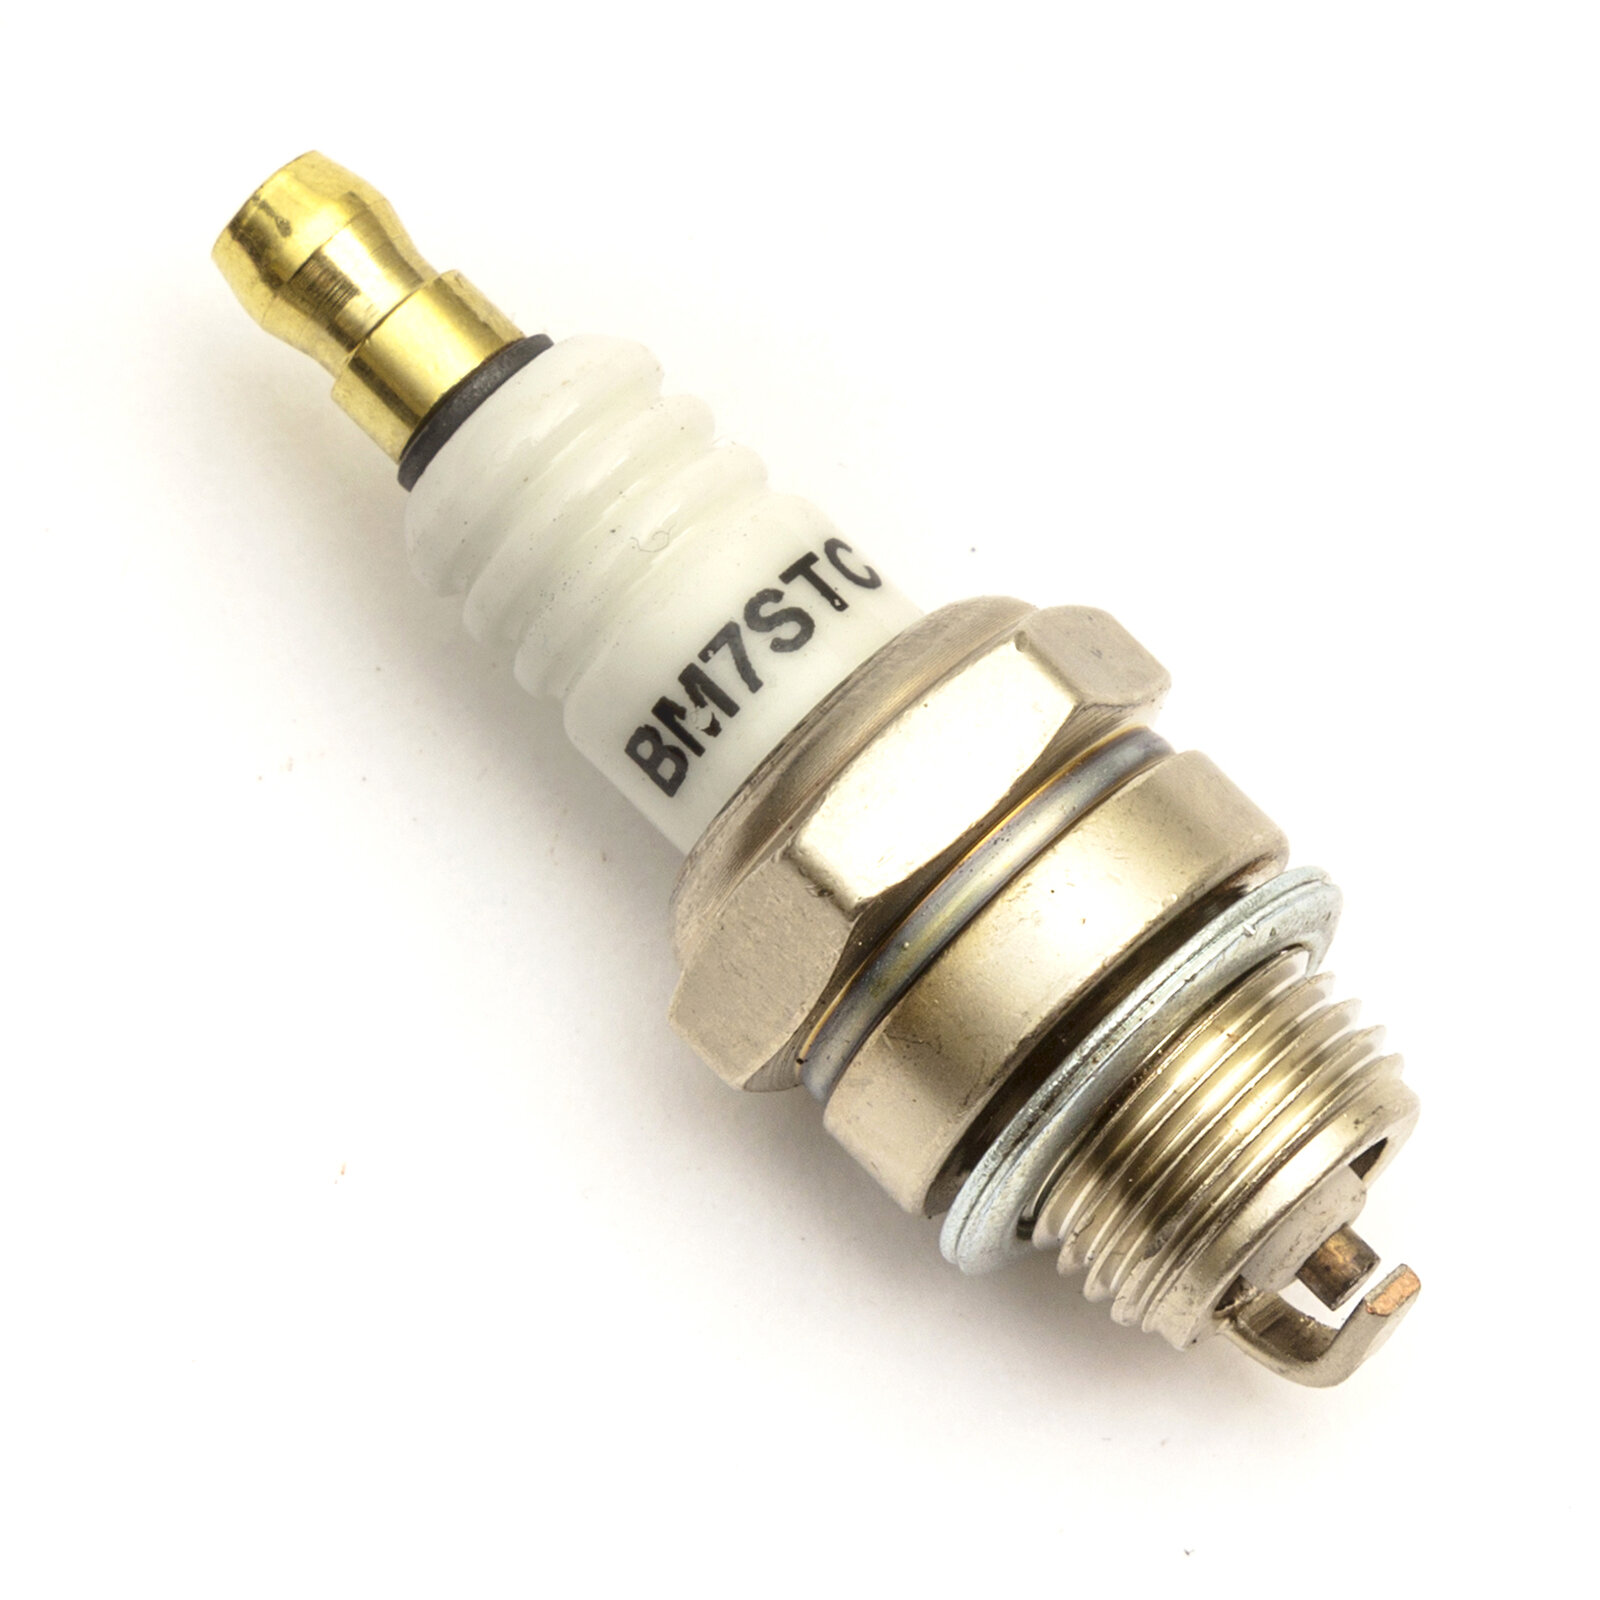 Torch Takumi Spark Plug Replaces NGK BPMR7A Fits Stihl MS440 & MS441 Chainsaw